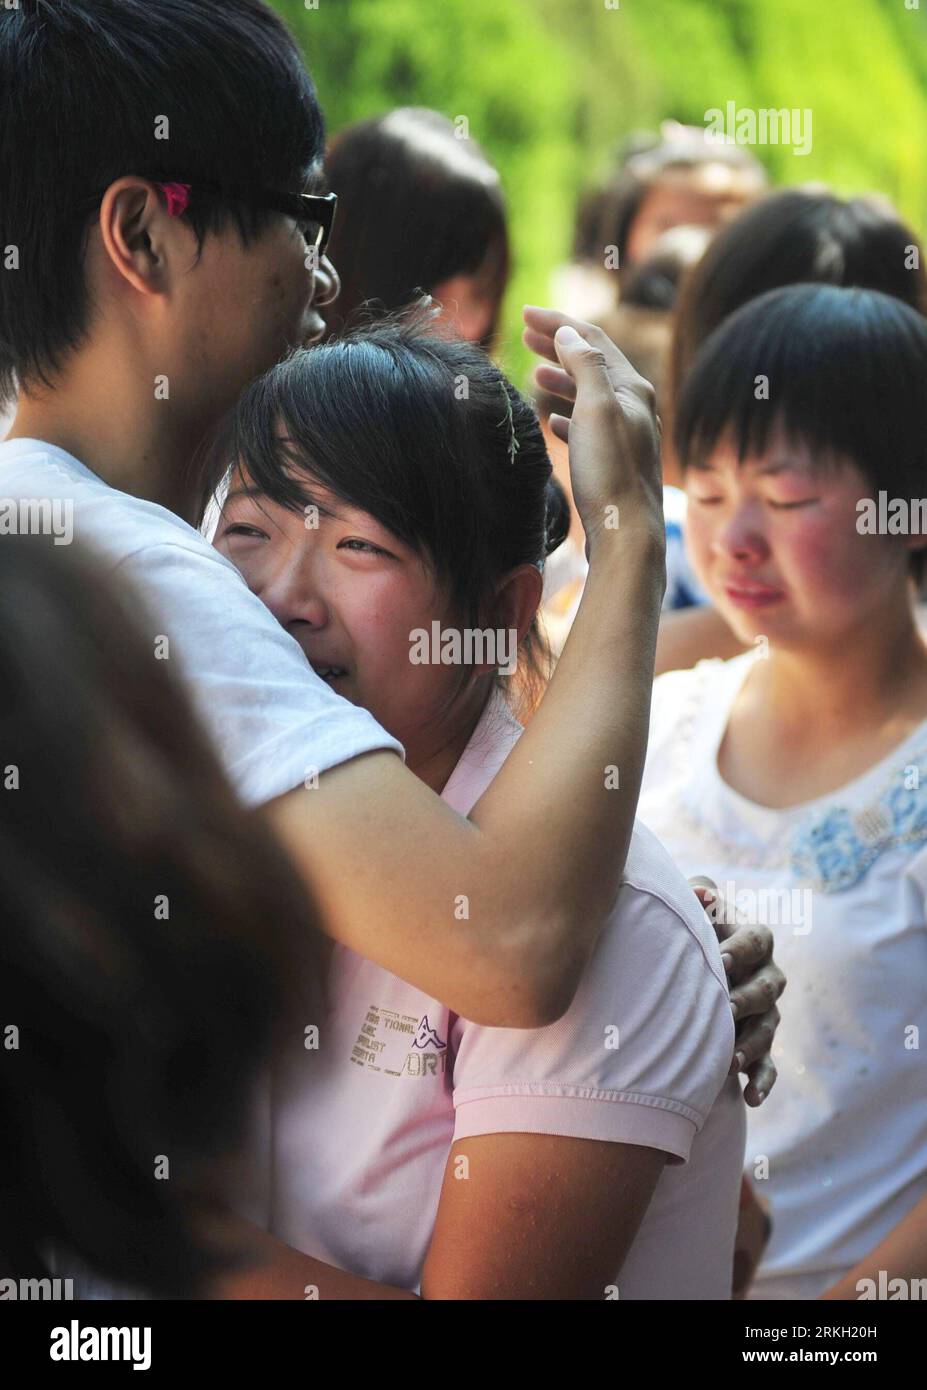 Bildnummer: 55676933  Datum: 03.08.2011  Copyright: imago/Xinhua (110803) -- LANZHOU, Aug. 3, 2011 (Xinhua) -- Yen Chieh Ching (1st L), a college student from Taiwan, hugs his student of No. 24 High School at the farewell ceremony of a summer school in Lanzhou, capital of northwest China s Gansu Province, Aug. 2, 2011. A group of 28 students and teachers from the Tsing Hua University, the Central University, the Chiao Tung University and the Yang-Ming University in Taiwan began their eleven-day teaching in the No. 24 High School in Lanzhou on July 23. These college students were here to help t Stock Photo